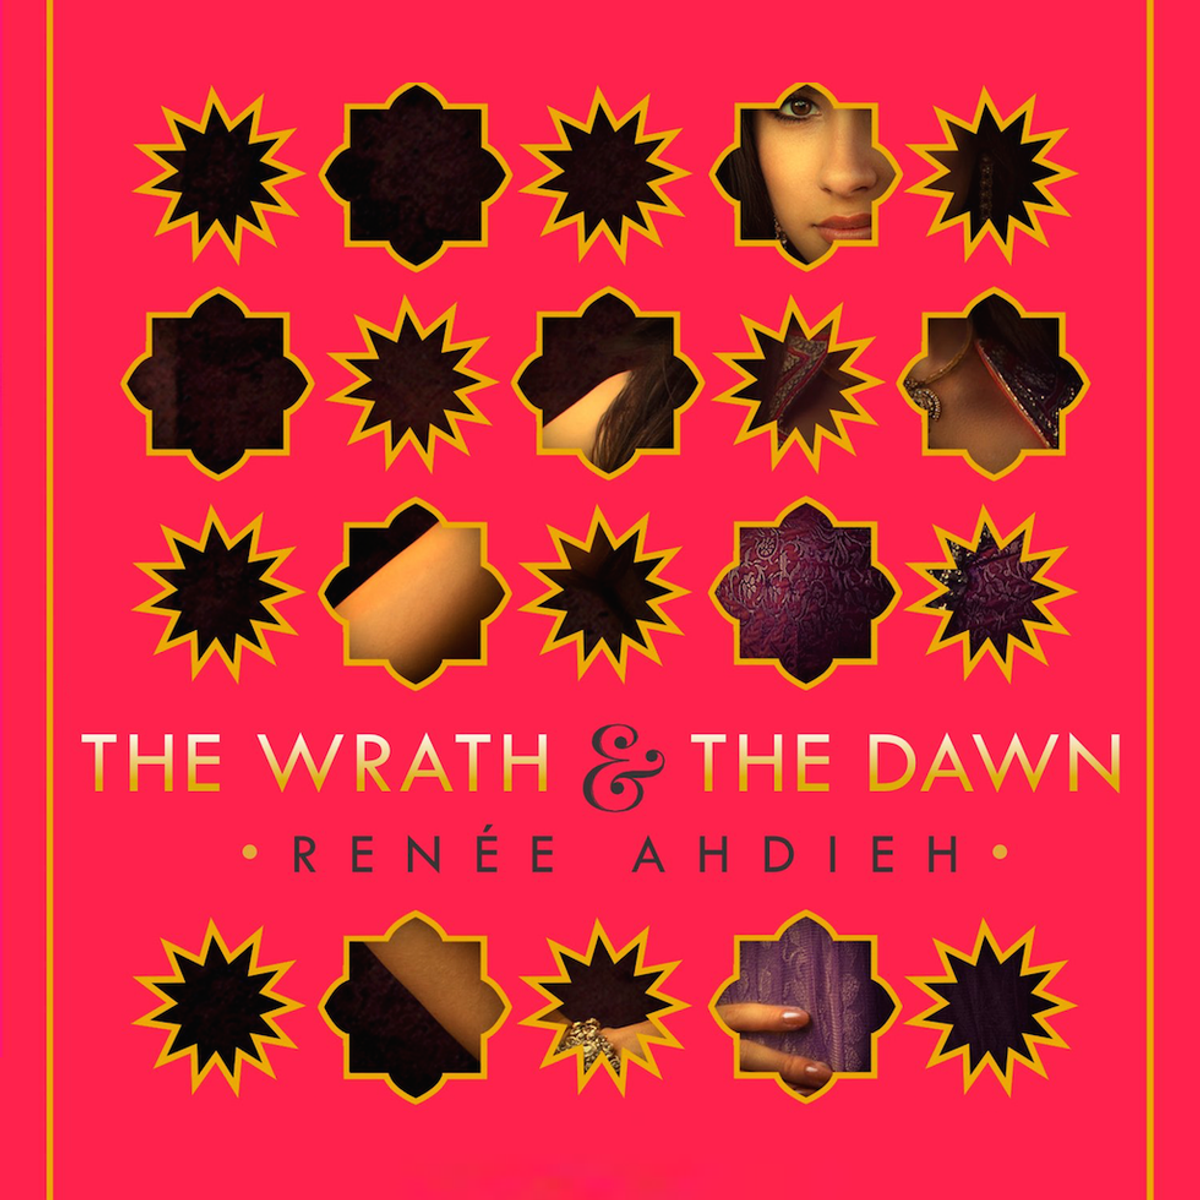 Book Review: 'The Wrath & The Dawn' by Renee Ahdieh